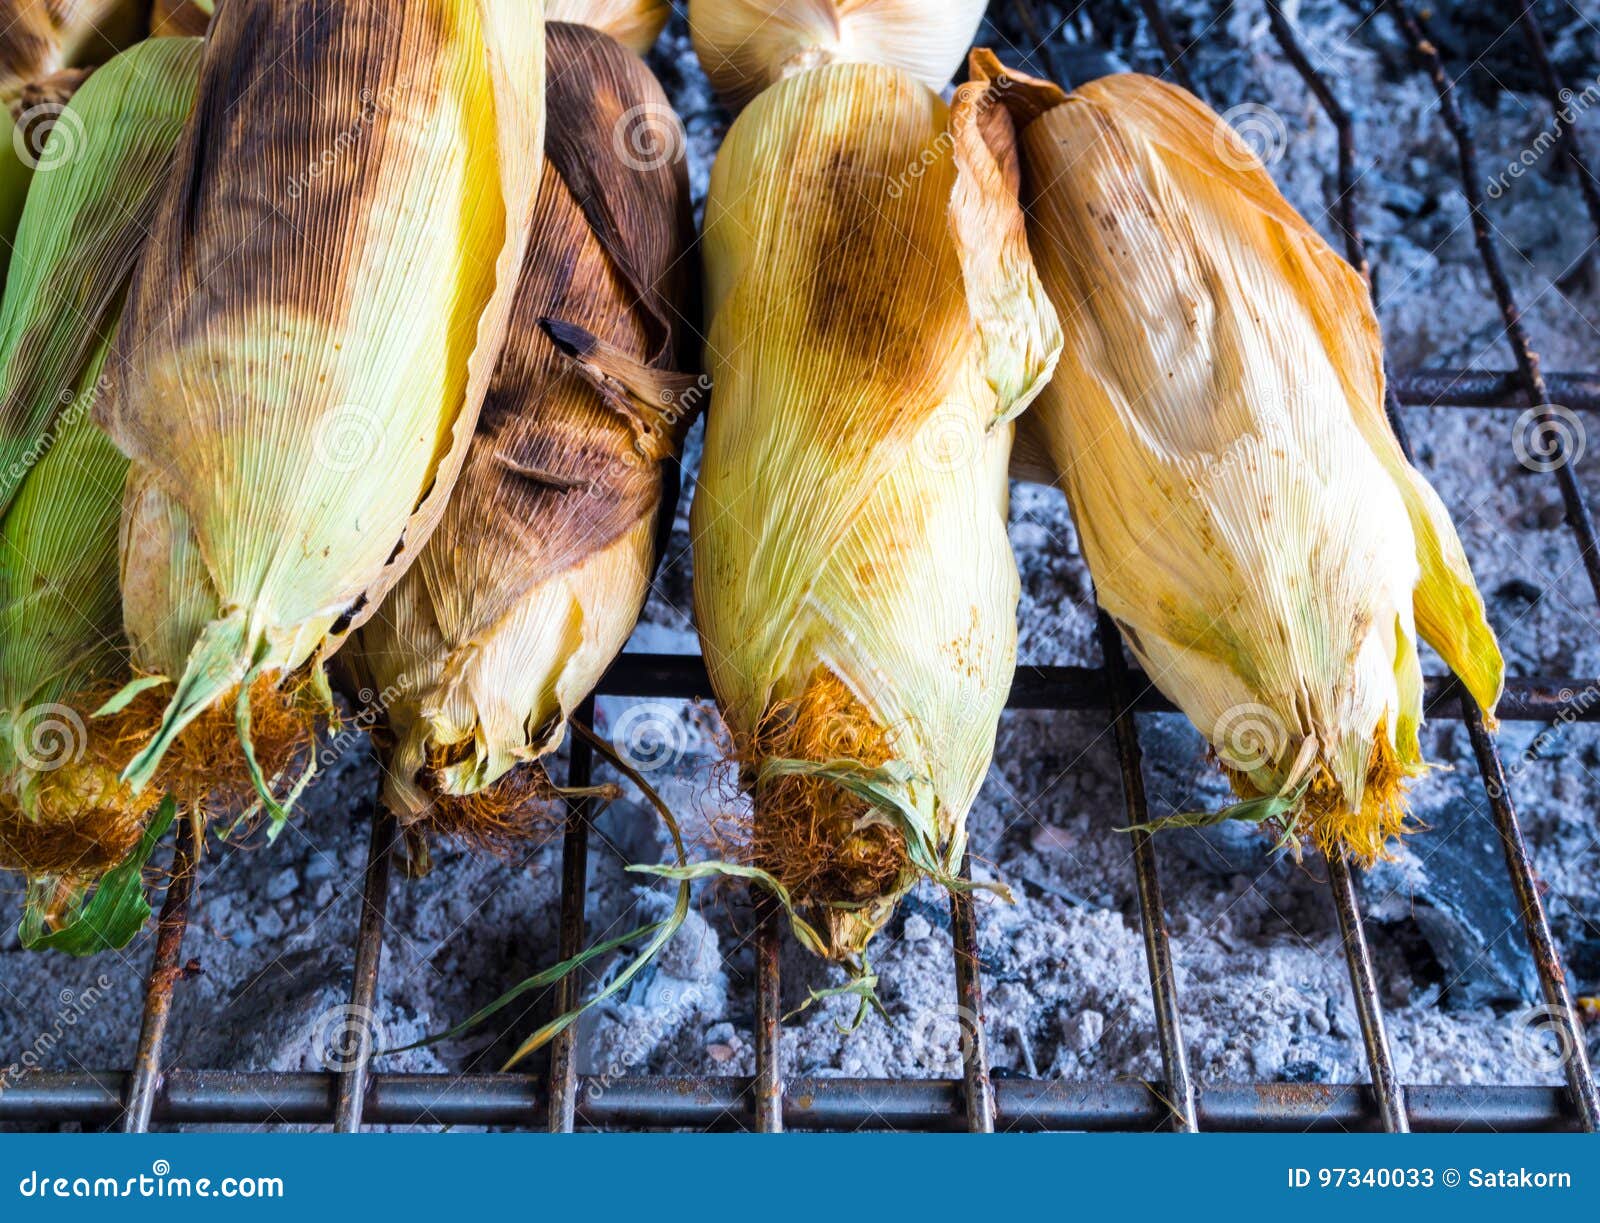 corn are grilled on grill grates